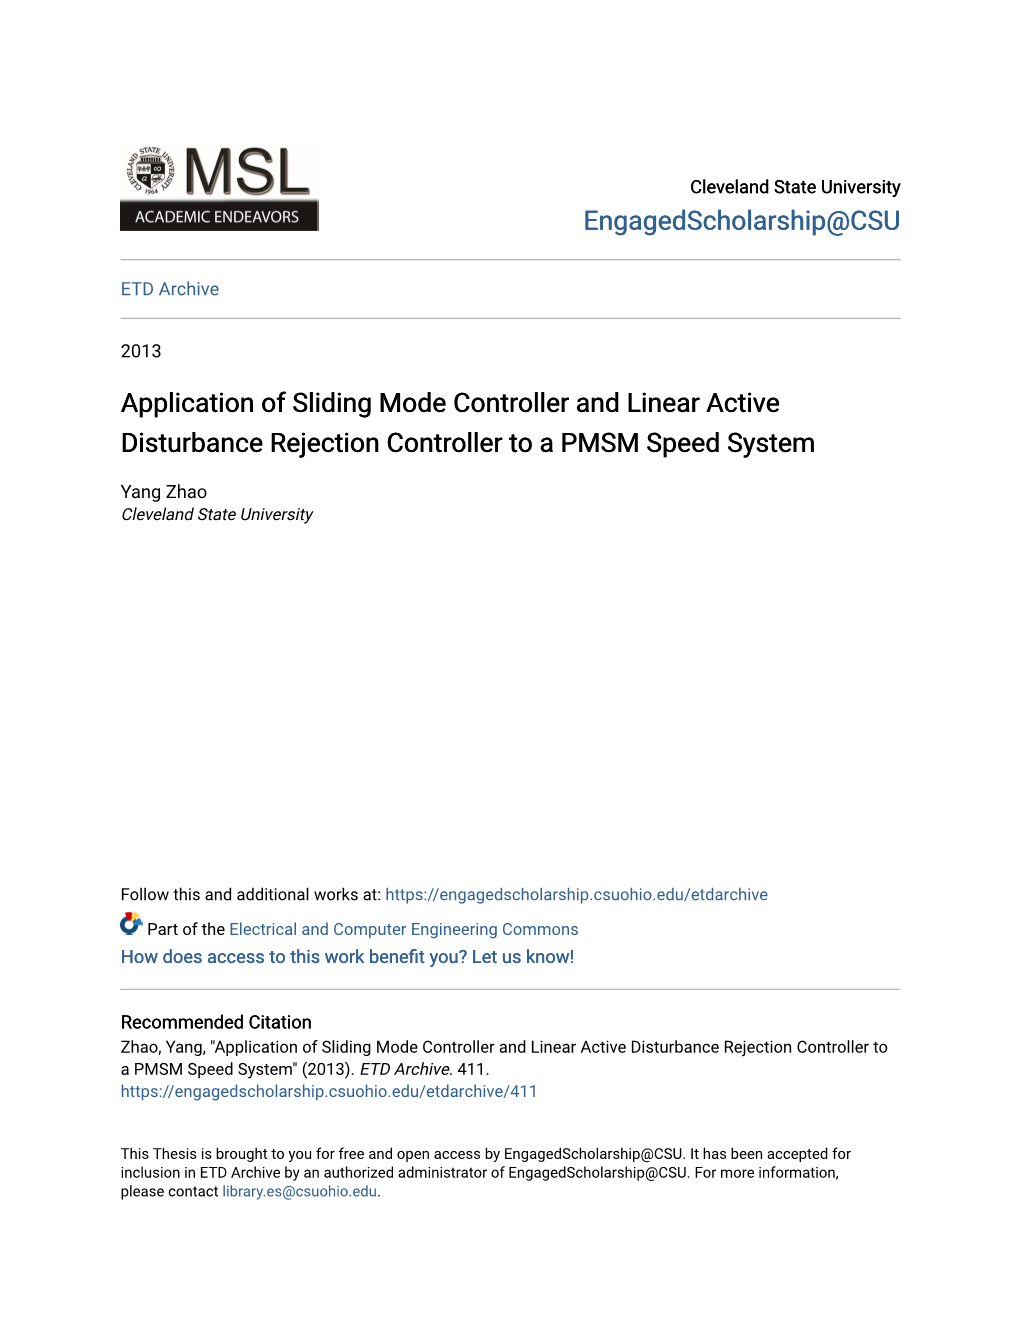 Application of Sliding Mode Controller and Linear Active Disturbance Rejection Controller to a PMSM Speed System